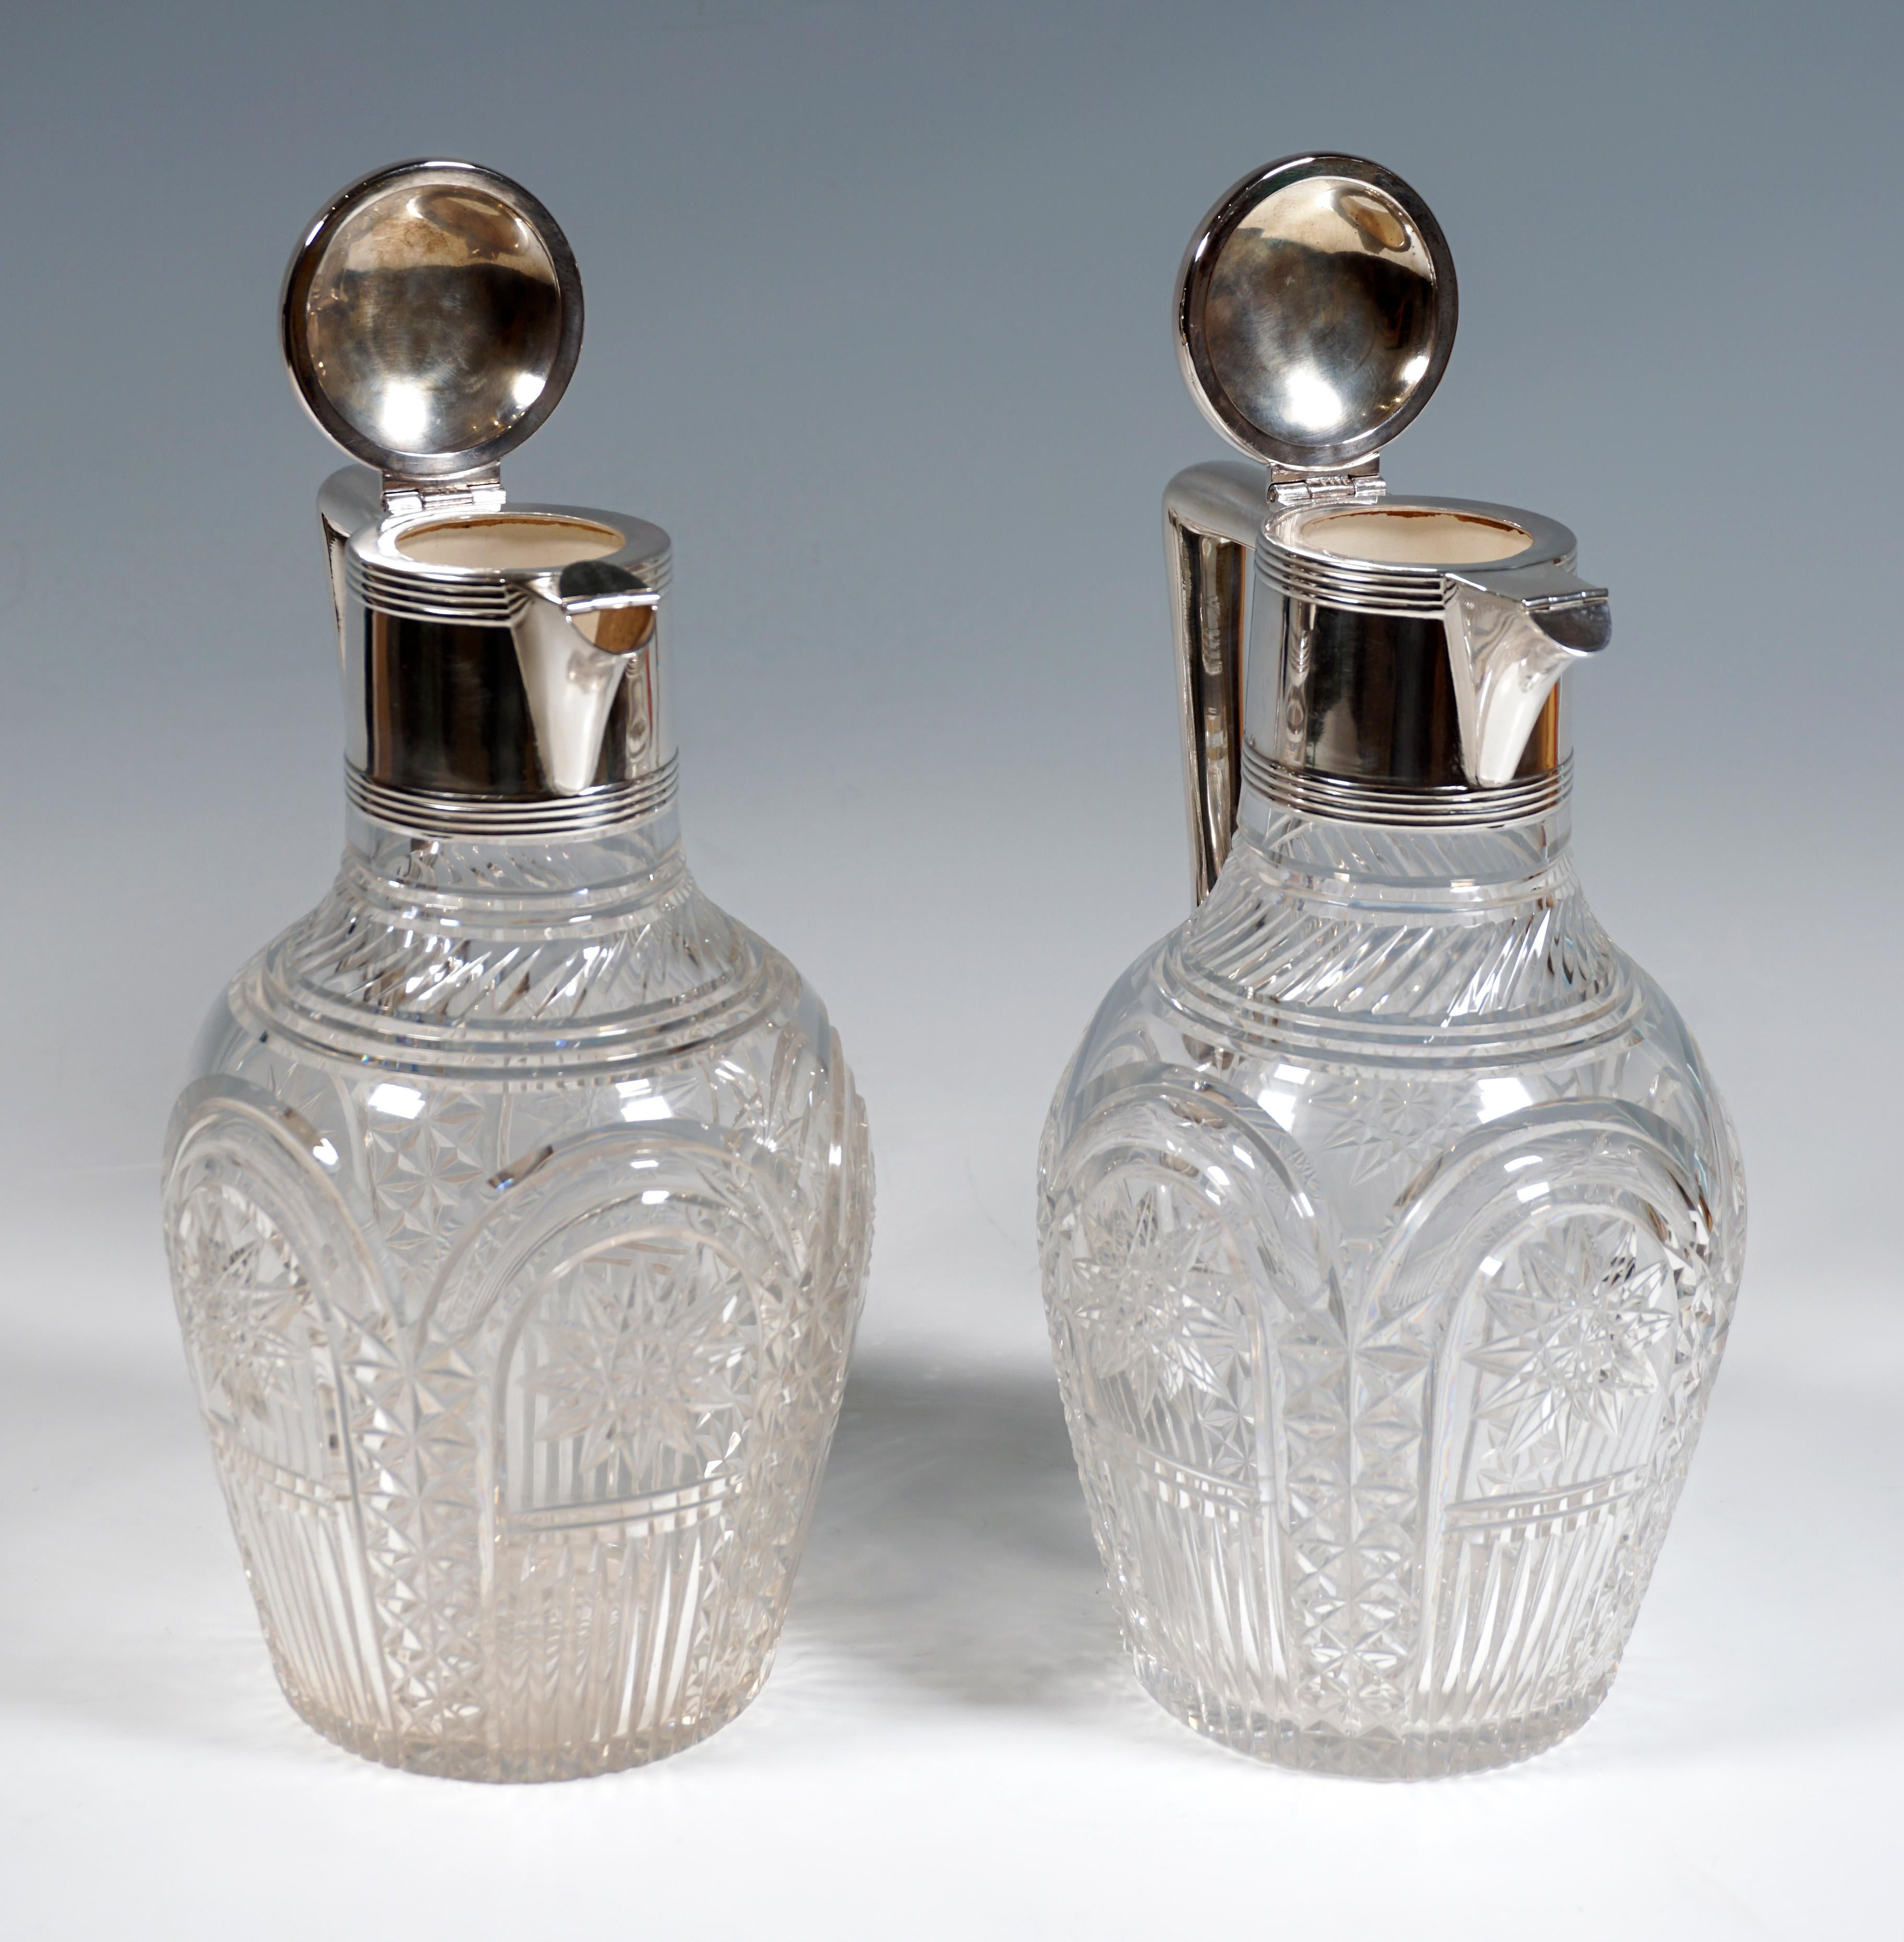 Pair of Art Nouveau Glass Carafes with Silver Mounts, Koch & Bergfeld, Germany In Good Condition For Sale In Vienna, AT